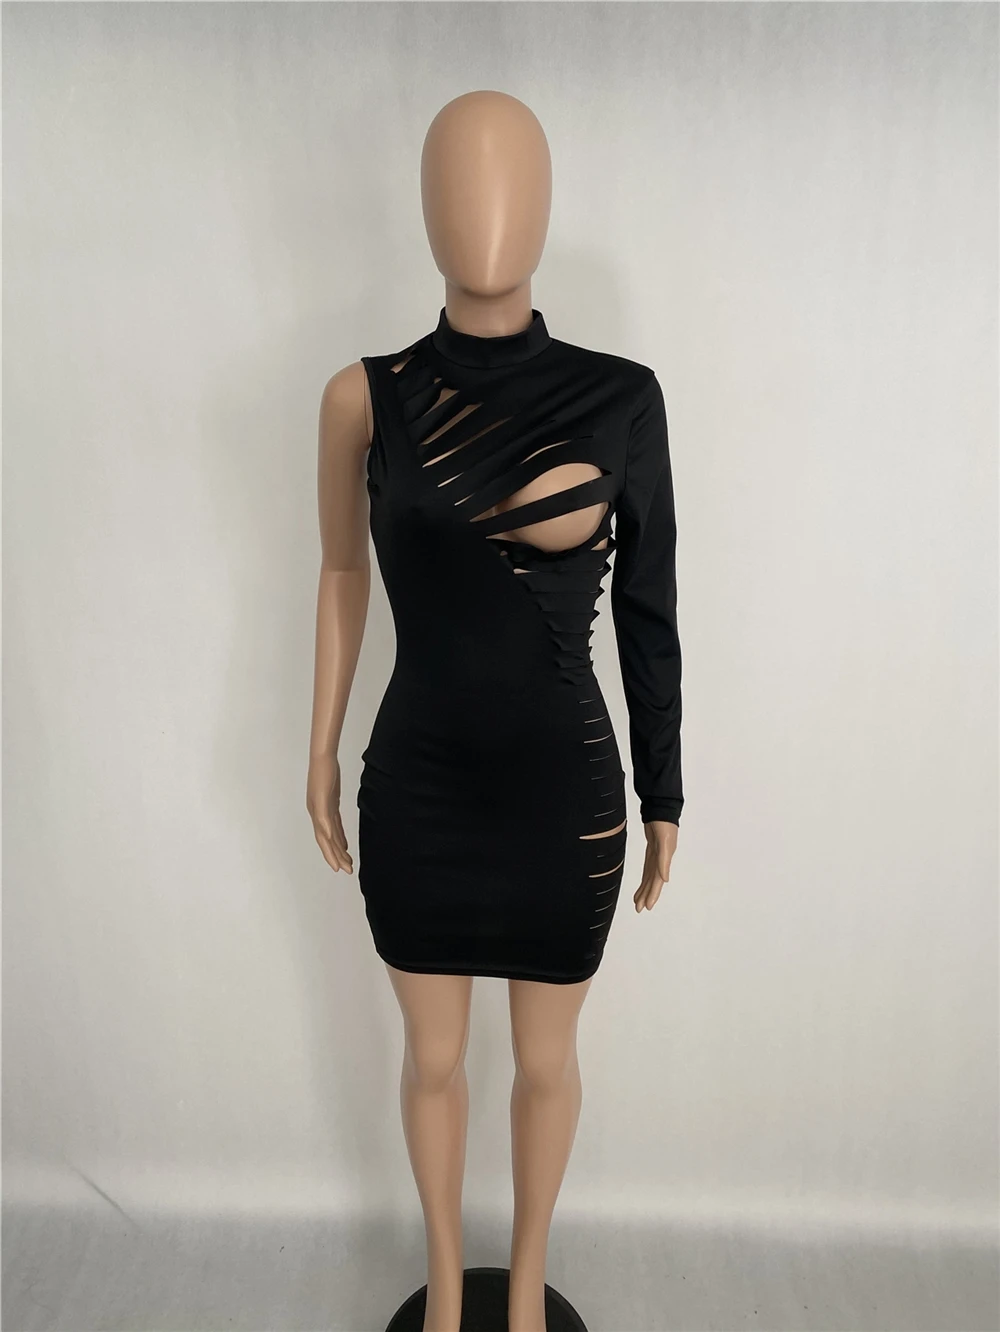 New Style Burnt Out Holes One Sleeve Solid Night Club Sexy Short Mini Ladies Bandage Dresses Woman Casual Dress